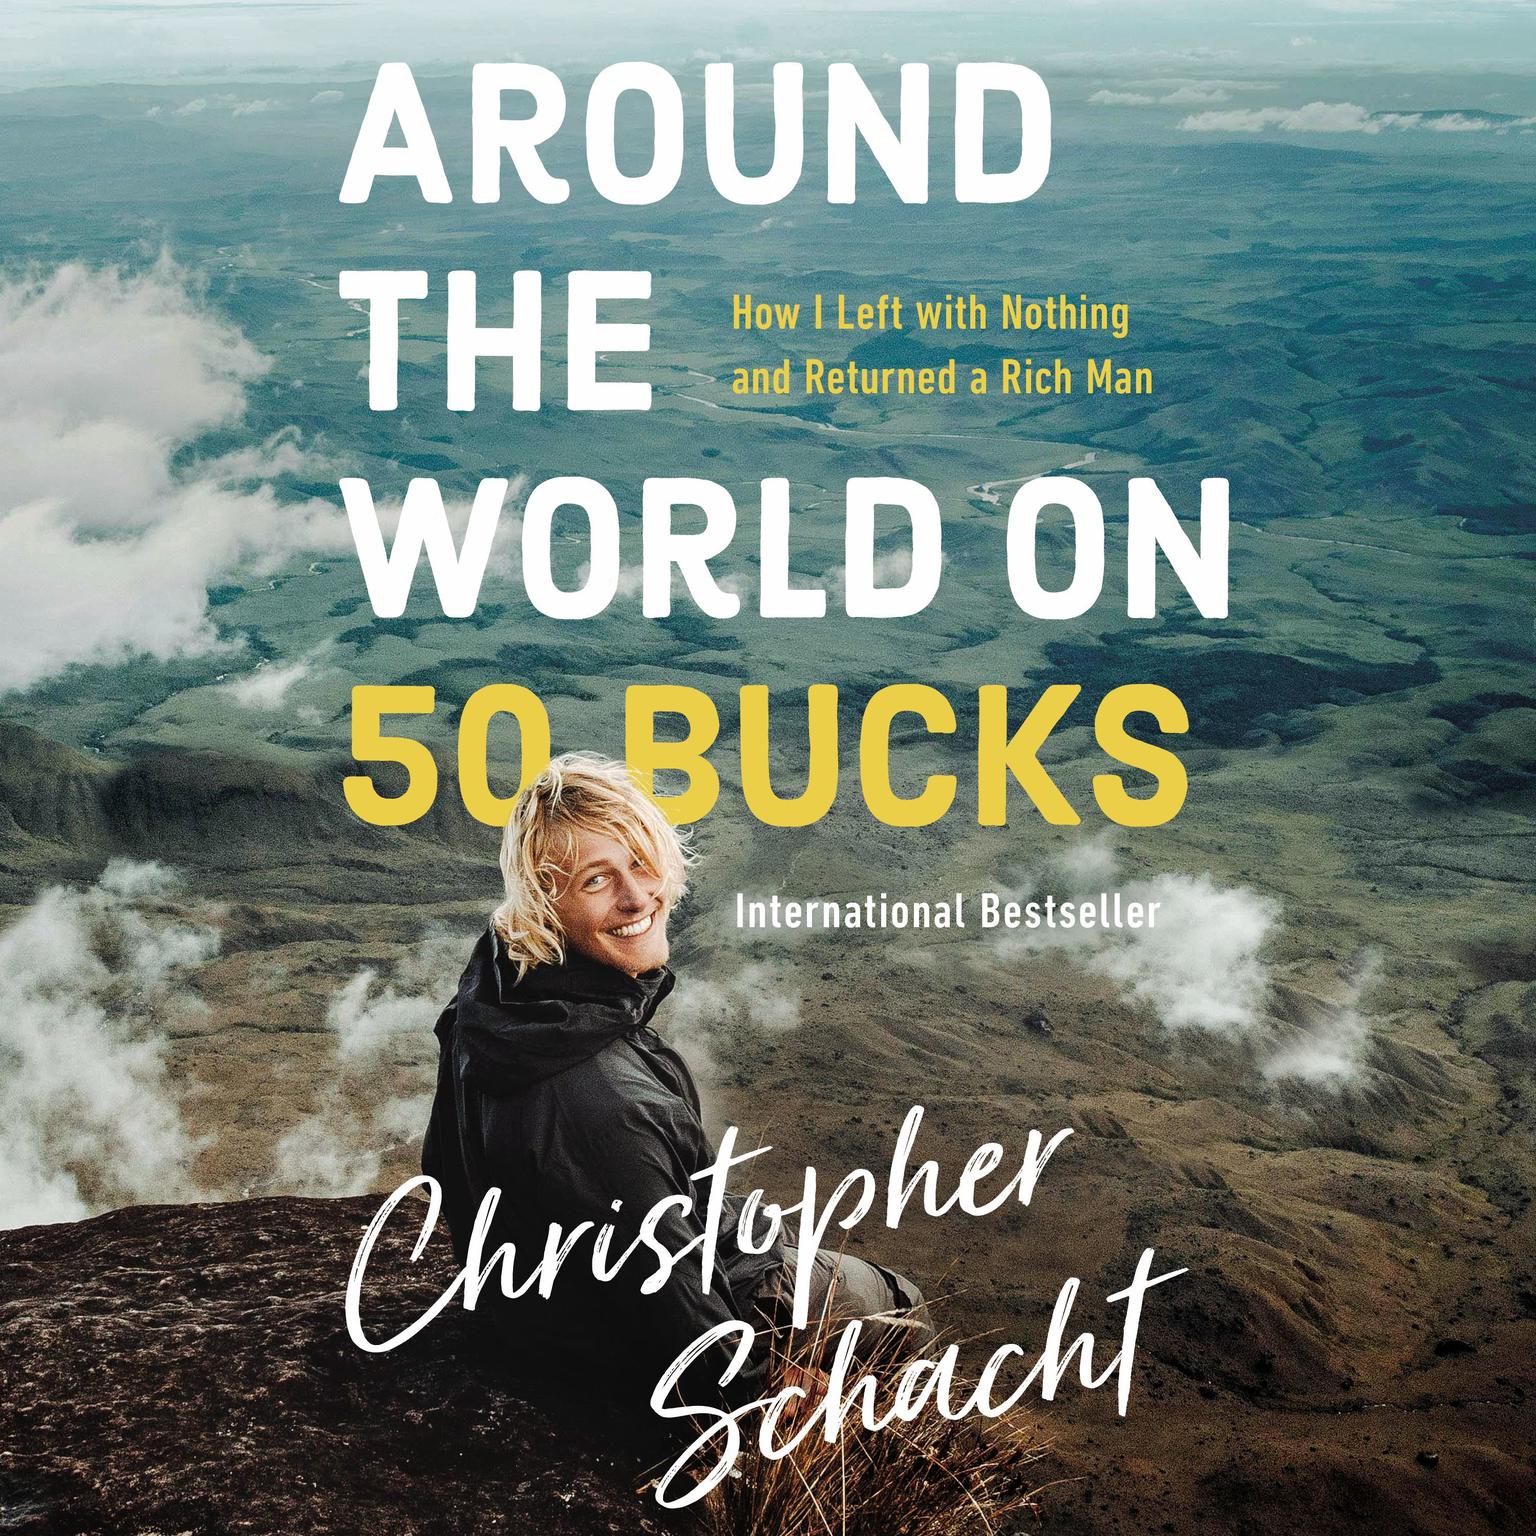 Around the World on 50 Bucks: How I Left with Nothing and Returned a Rich Man Audiobook, by Christopher Schacht